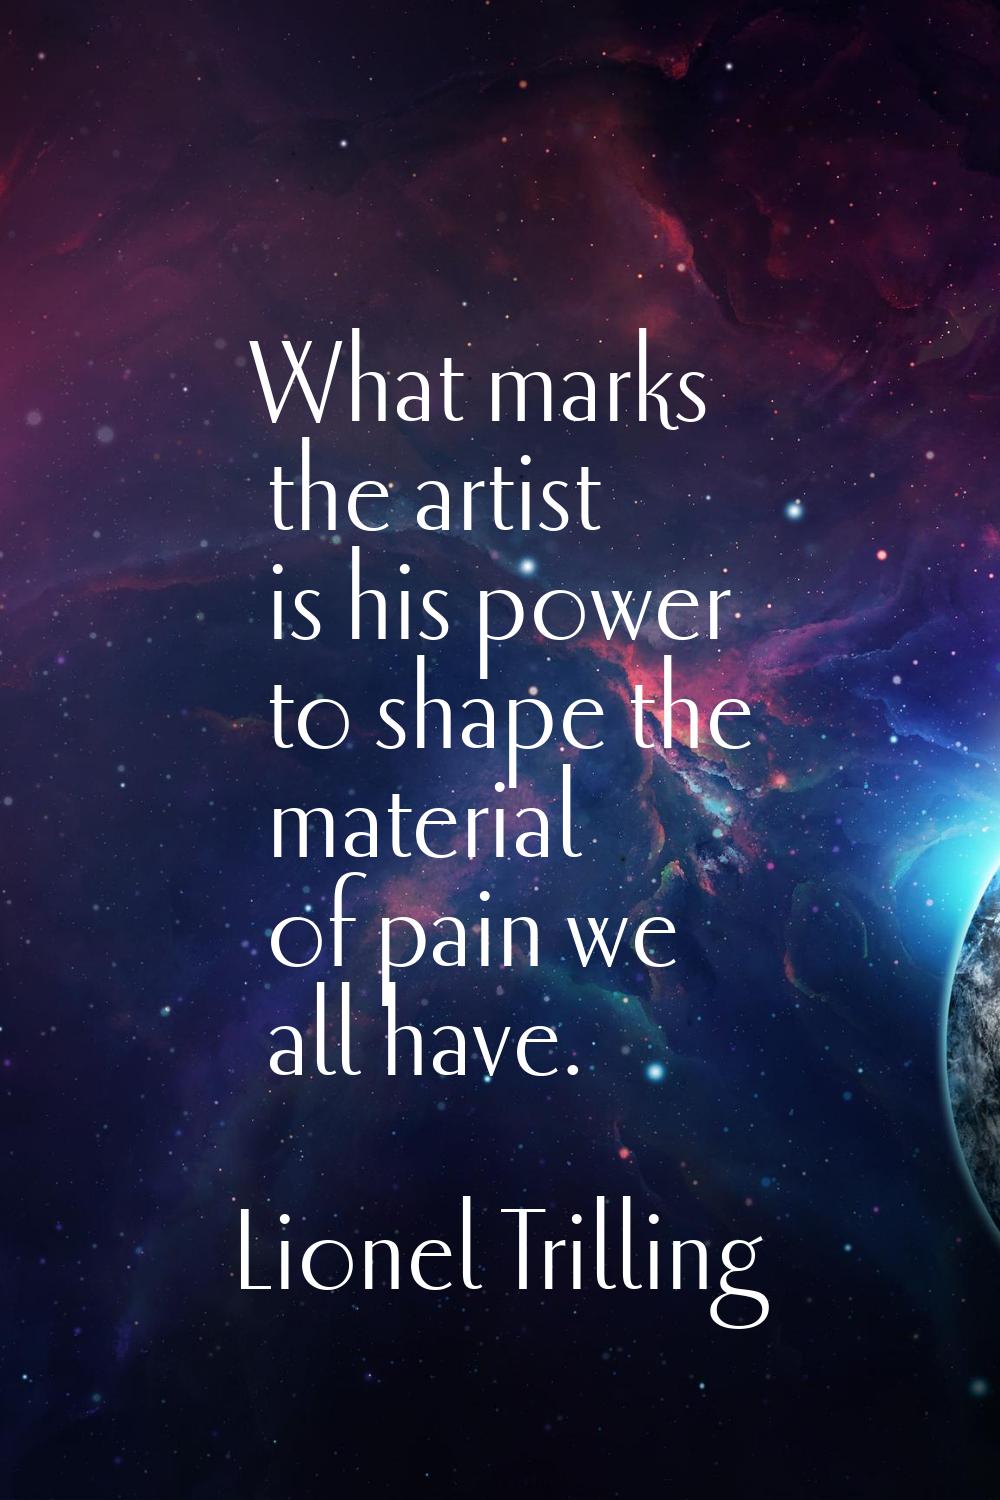 What marks the artist is his power to shape the material of pain we all have.